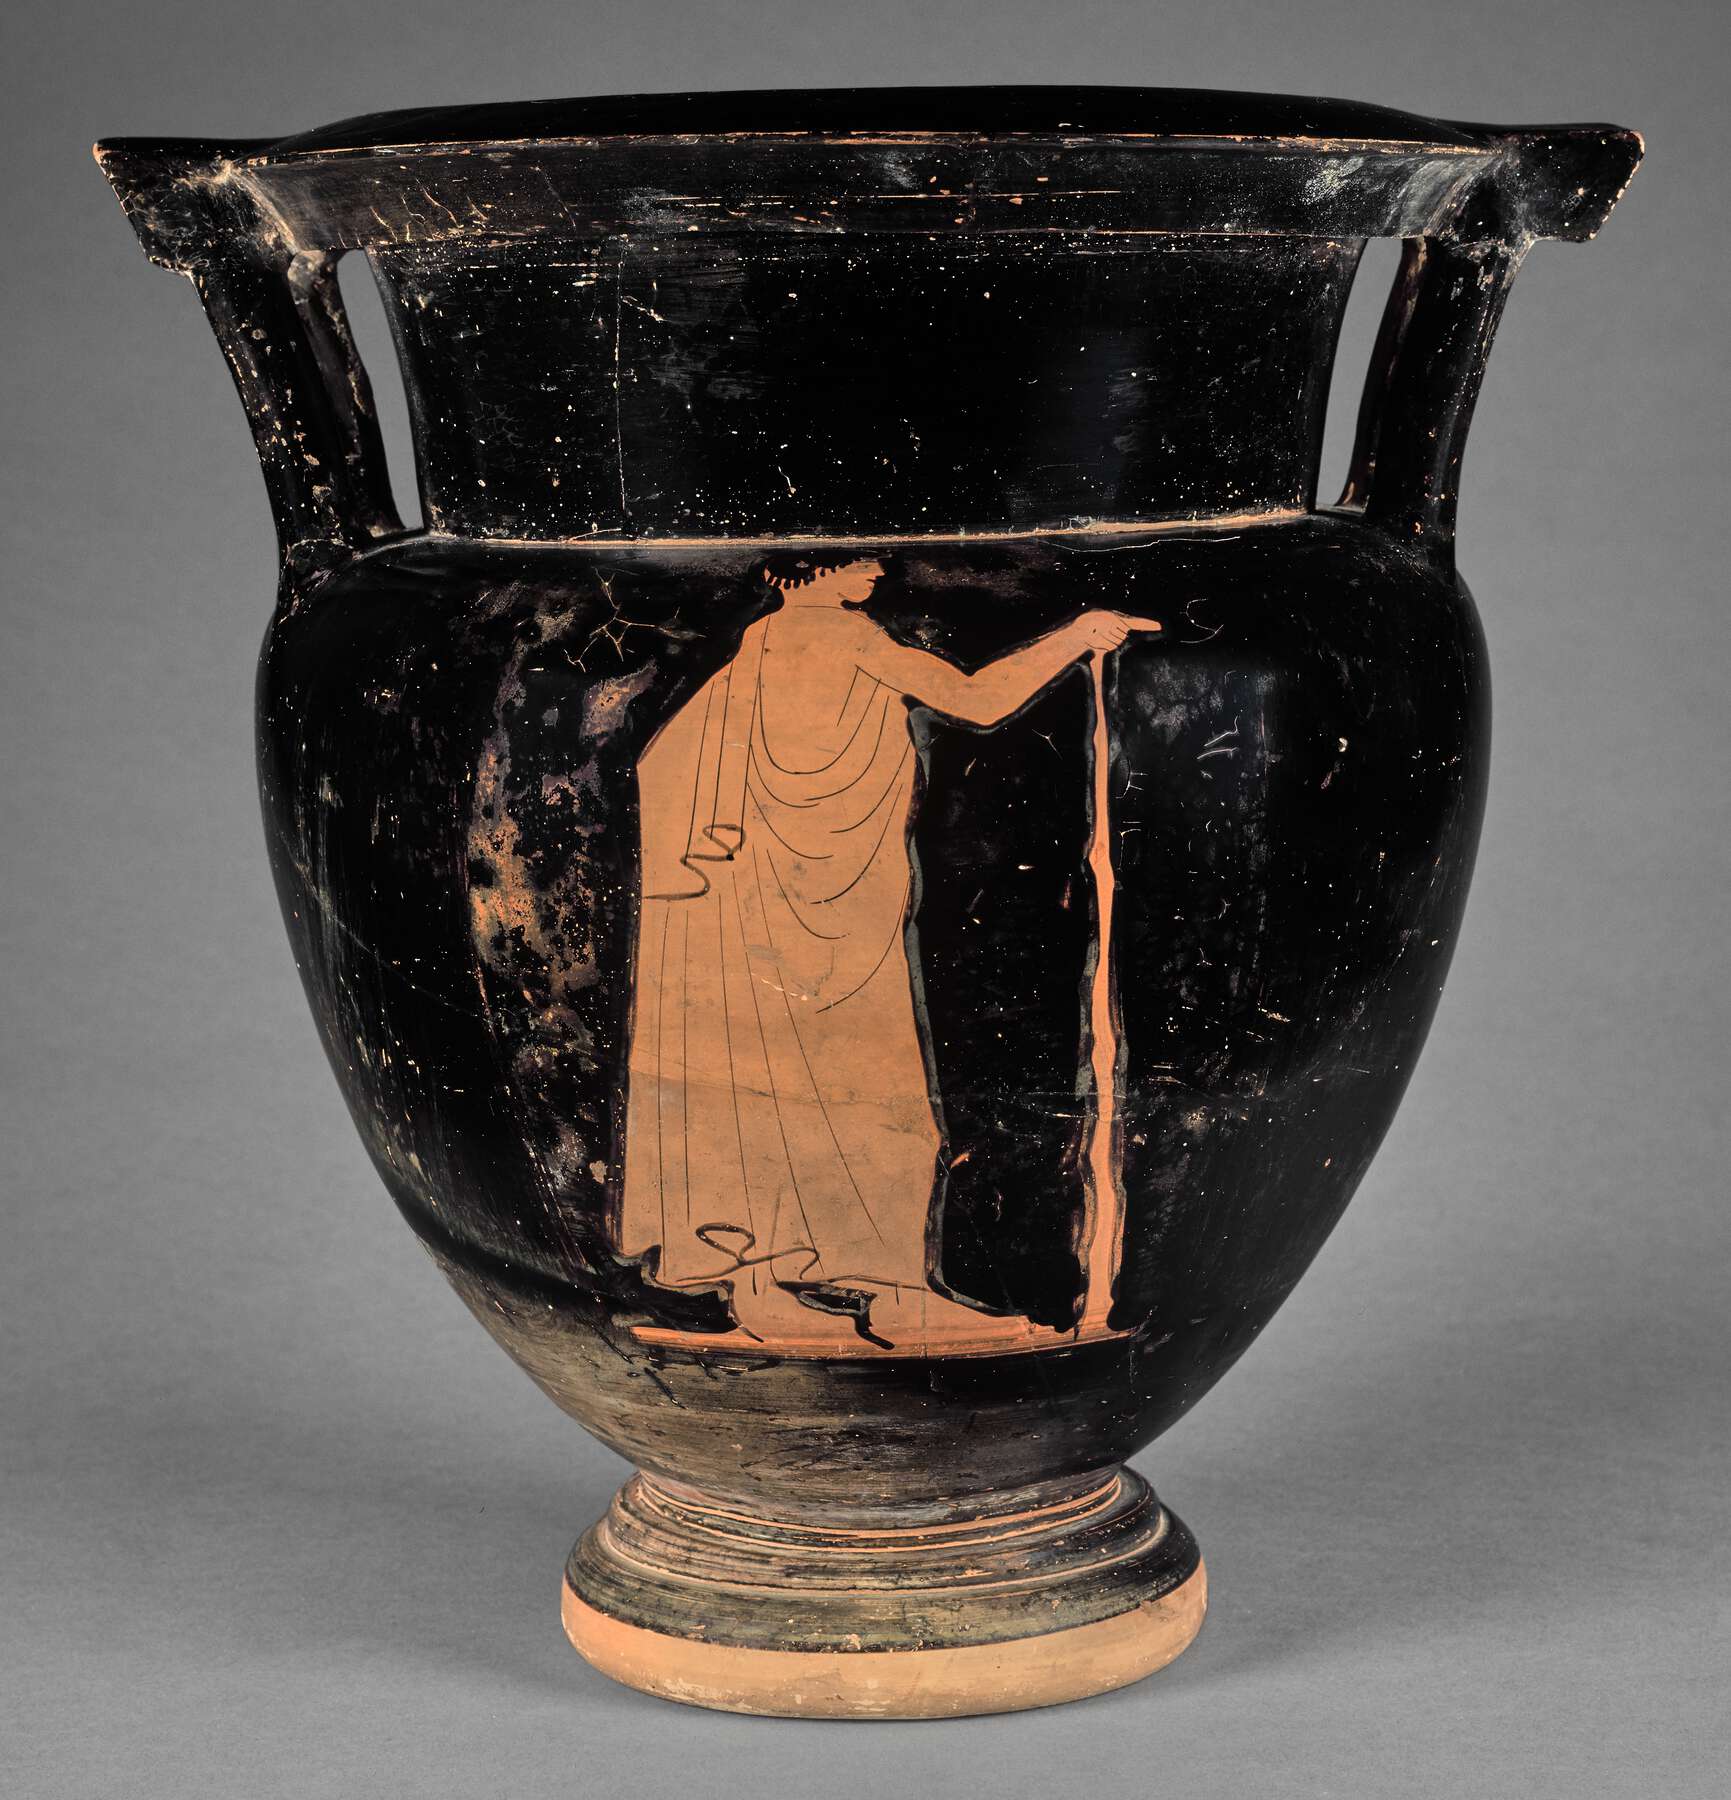 Another view of the vase, the body decoration includes one person holding a cane or staff and no decoration on the neck